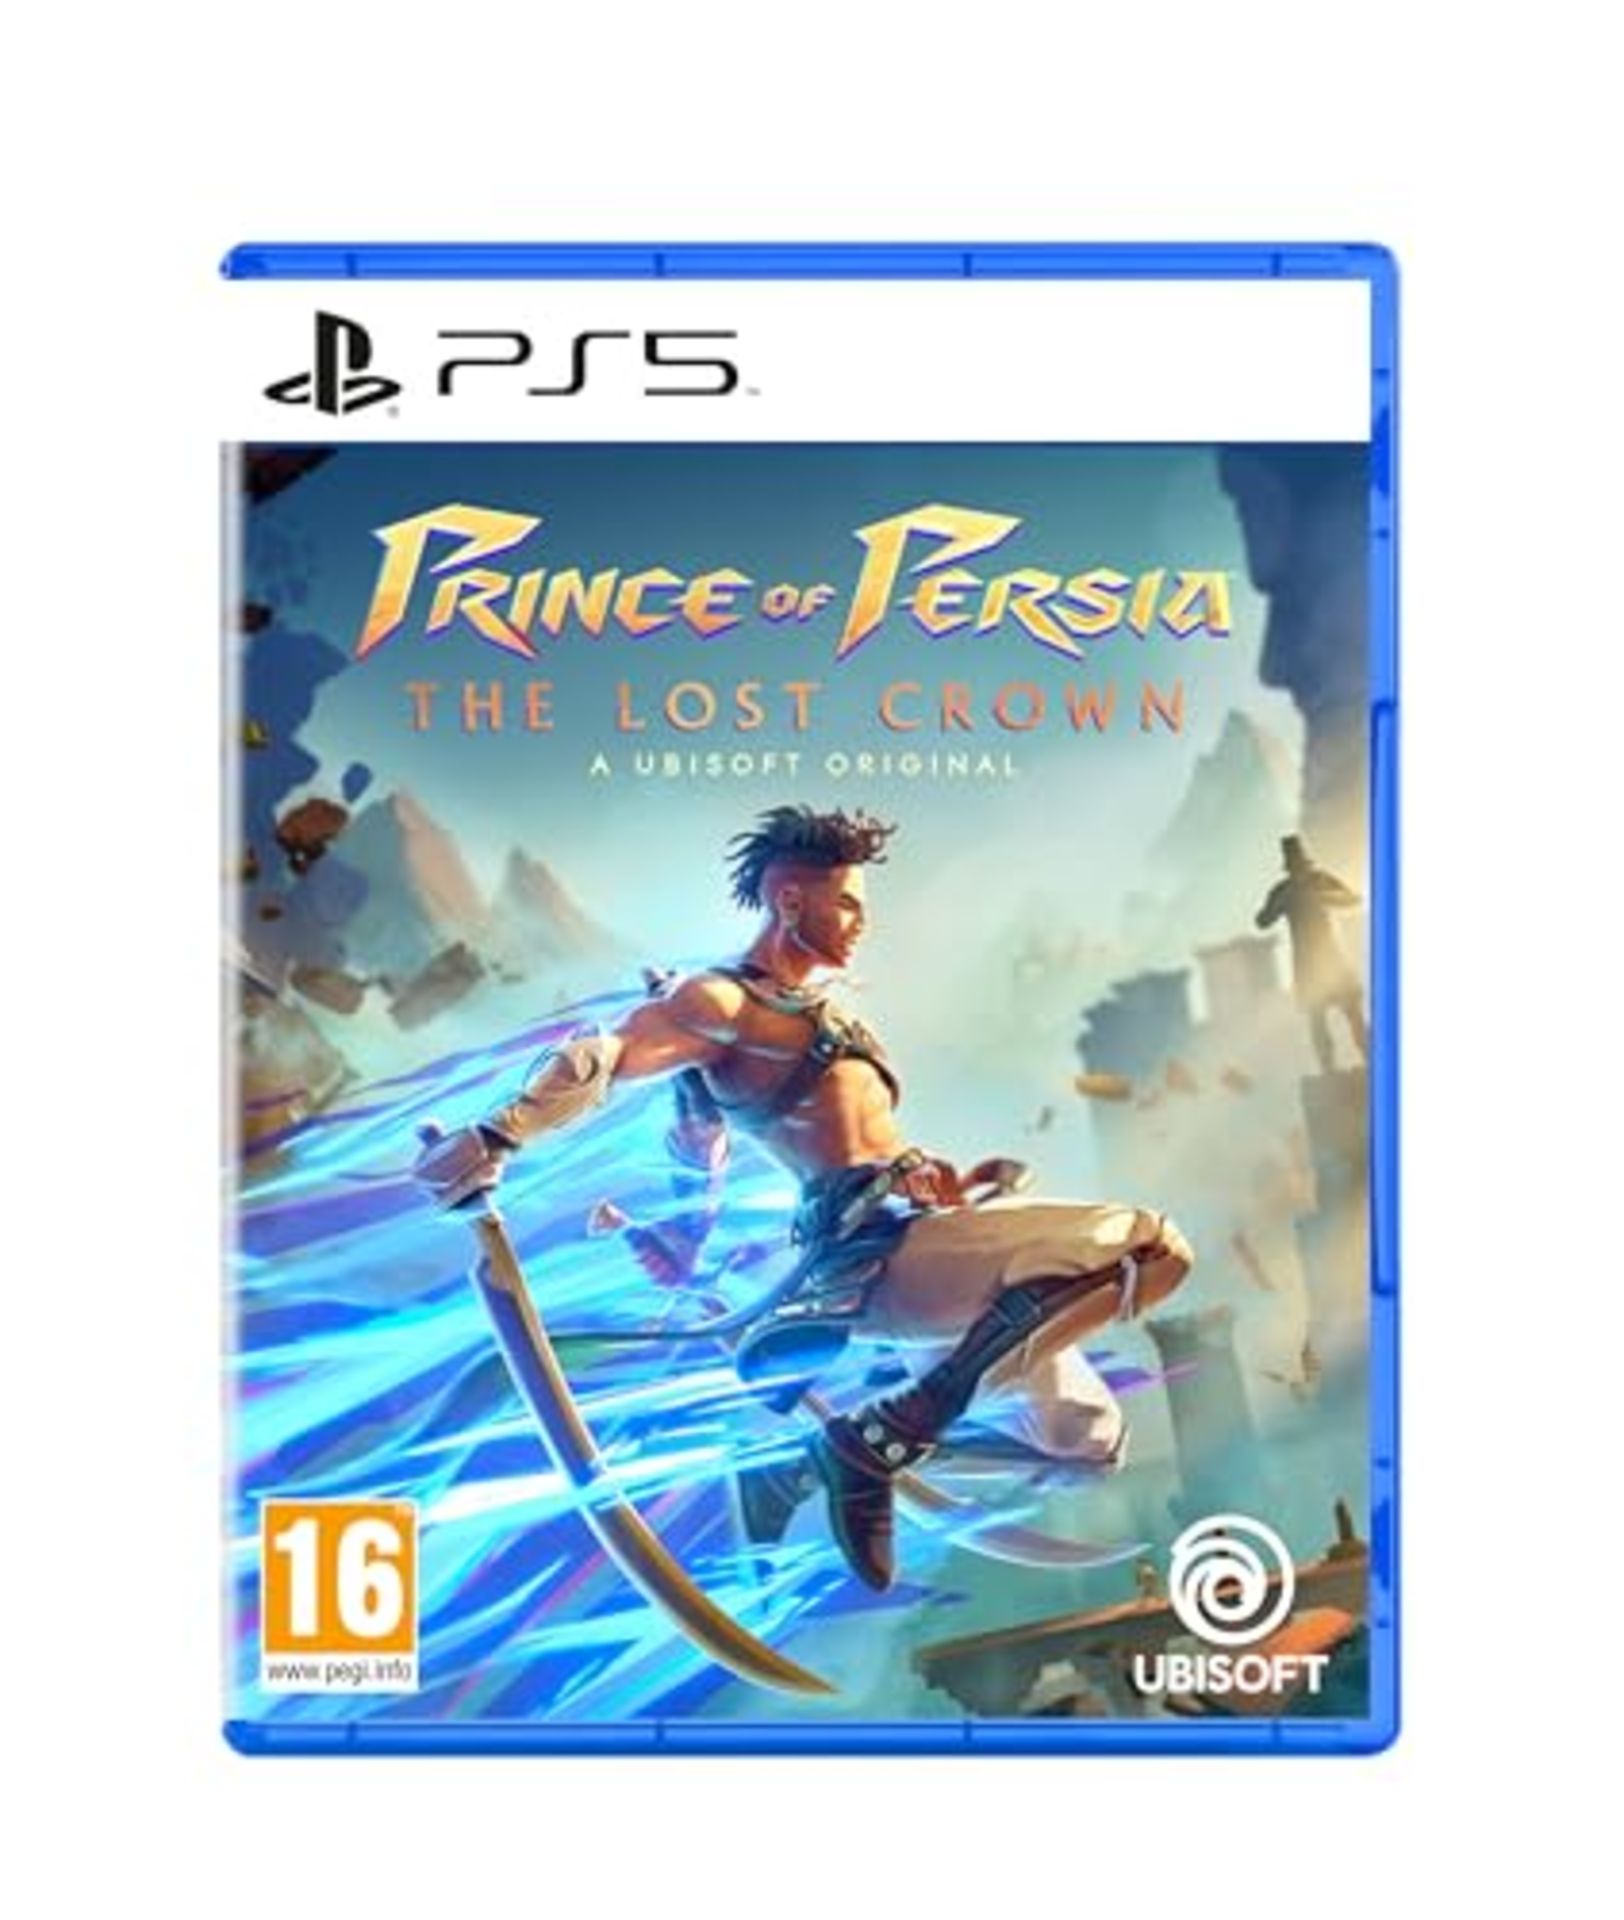 Prince of Persia: The Lost Crown (PS5) - Image 4 of 6